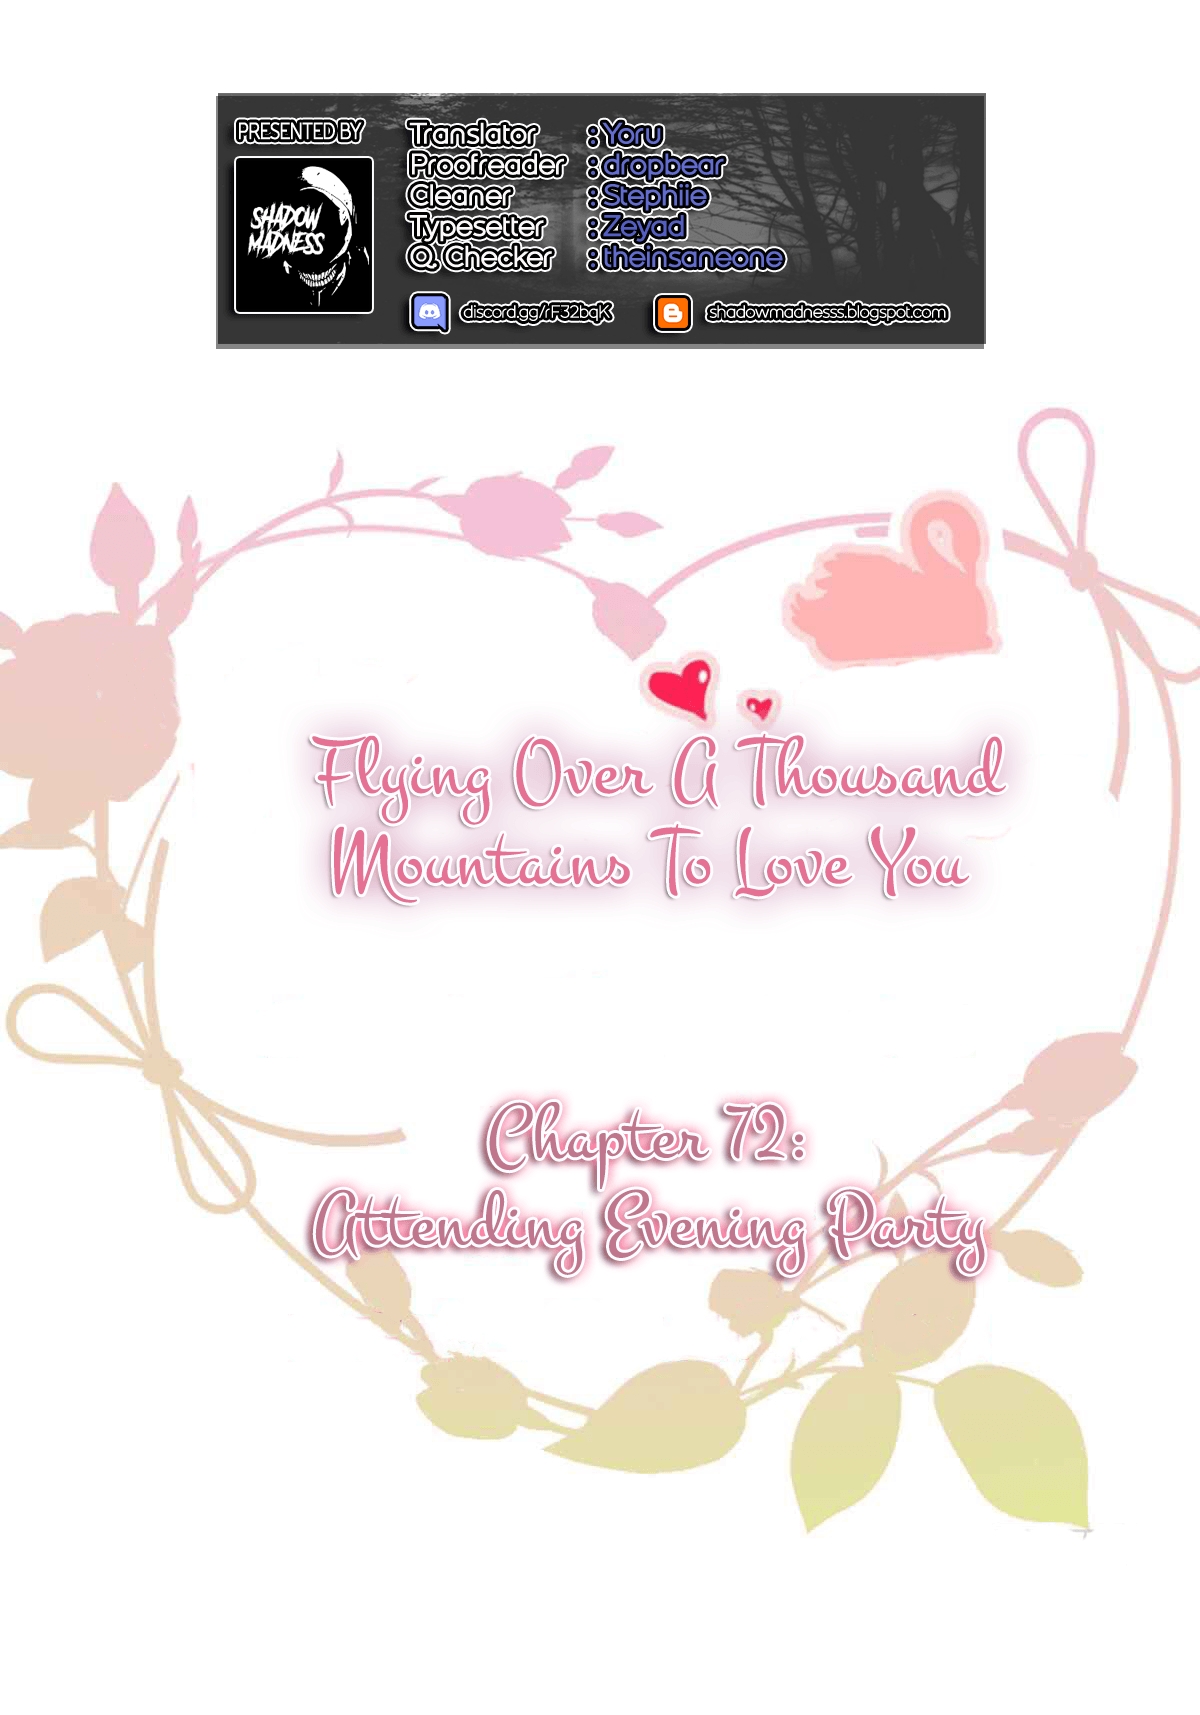 Flying Over a Thousand Mountains to Love You Ch. 72 Attending Evening Party